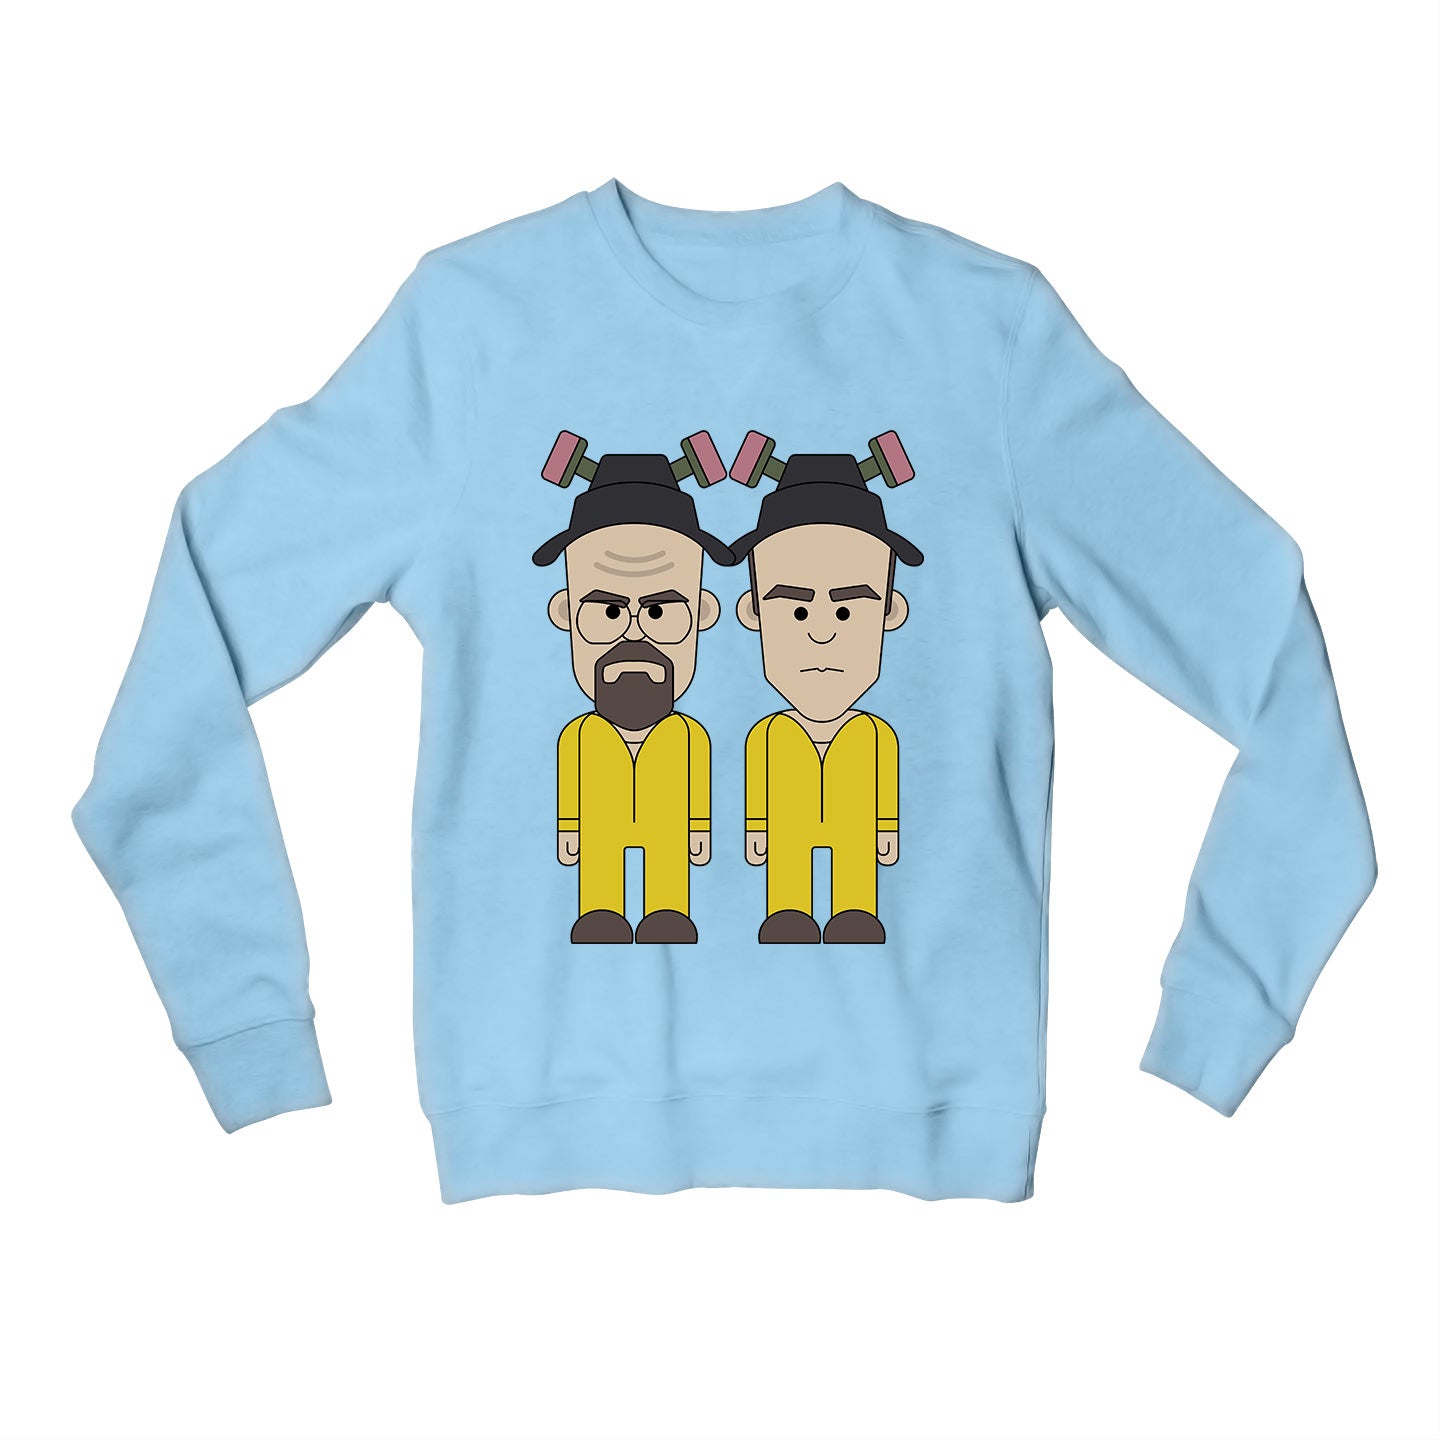 Breaking Bad Sweatshirt by The Banyan Tee TBT - Walter and Jesse